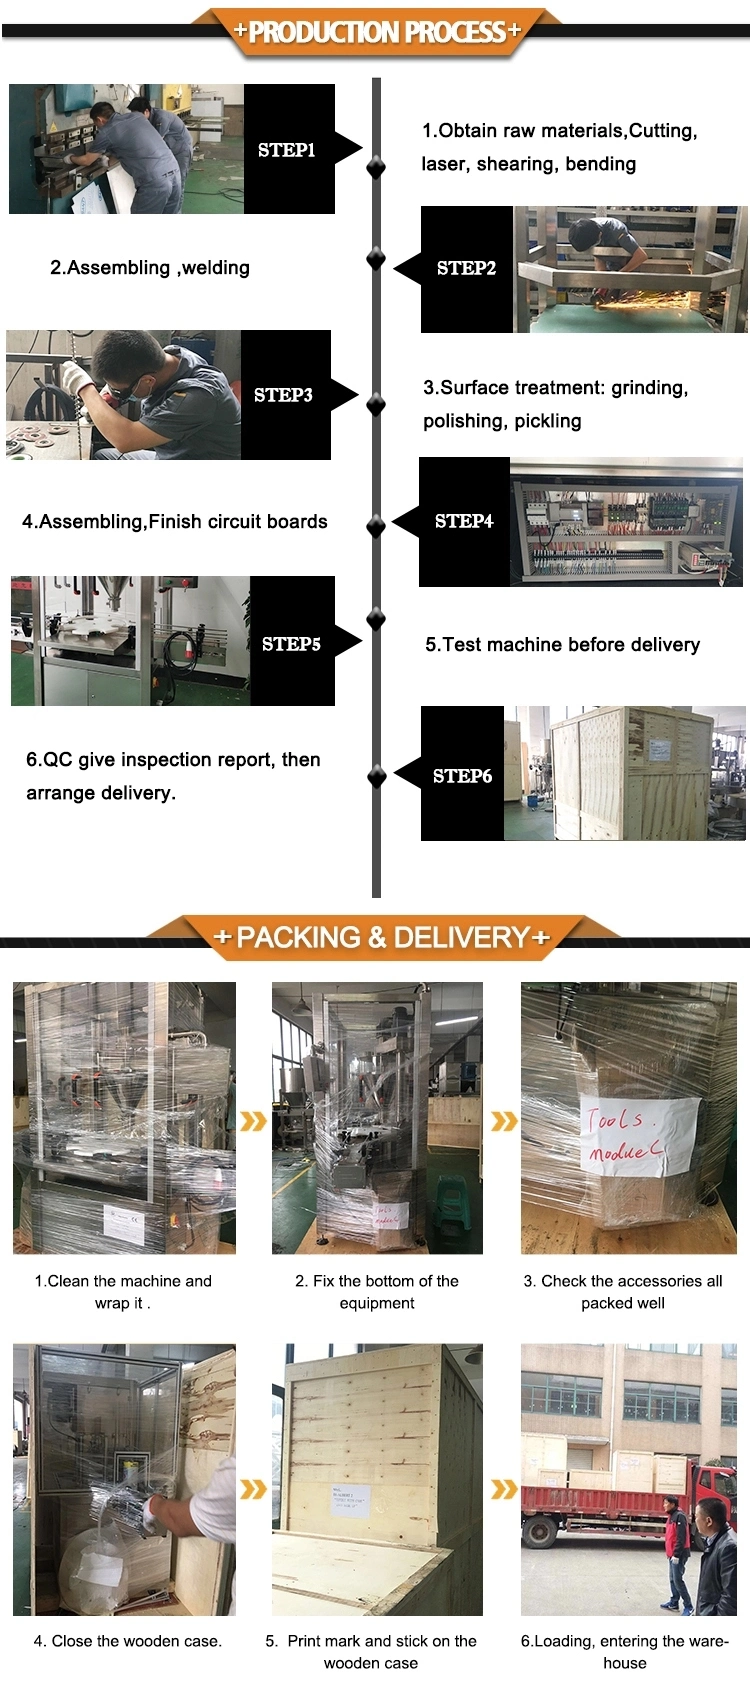 Automatic Liquor, Peanut Butter, Red Bean Paste, Salad Dressing, Cheese Liquid Bag Packing Packaging Machine